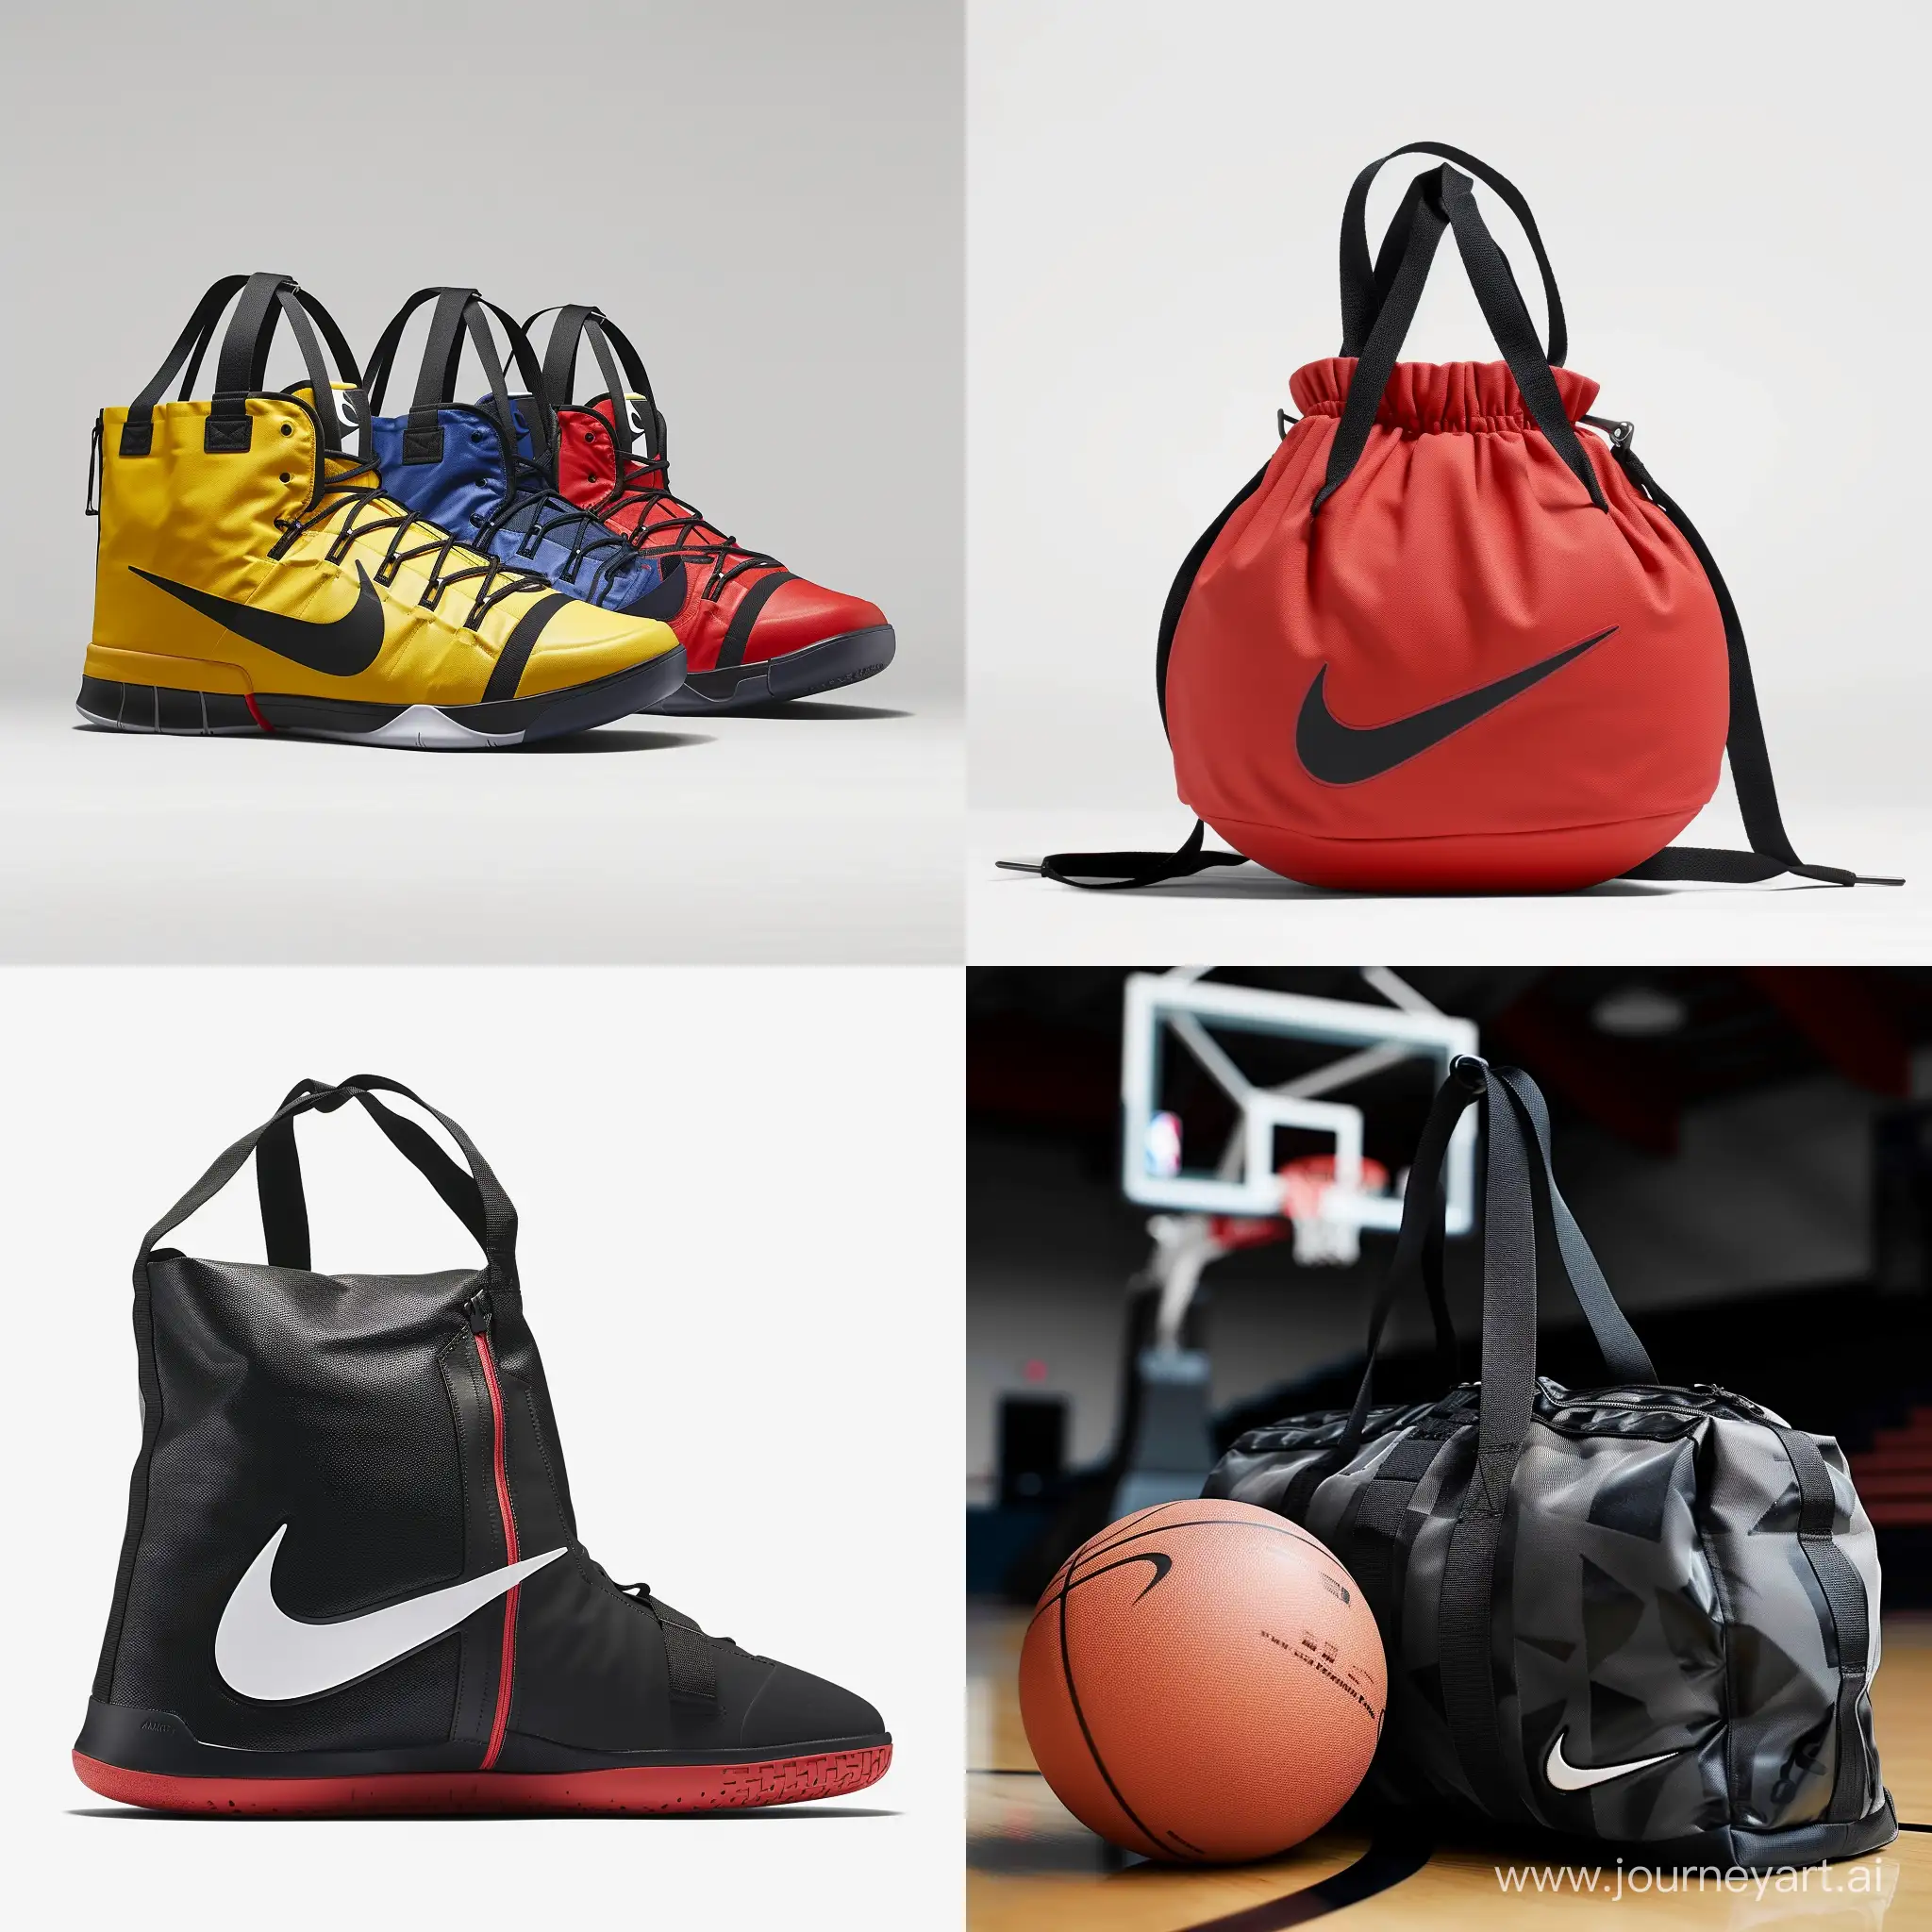 Nike-Basketball-Bags-Collection-Versatile-and-Stylish-Accessories